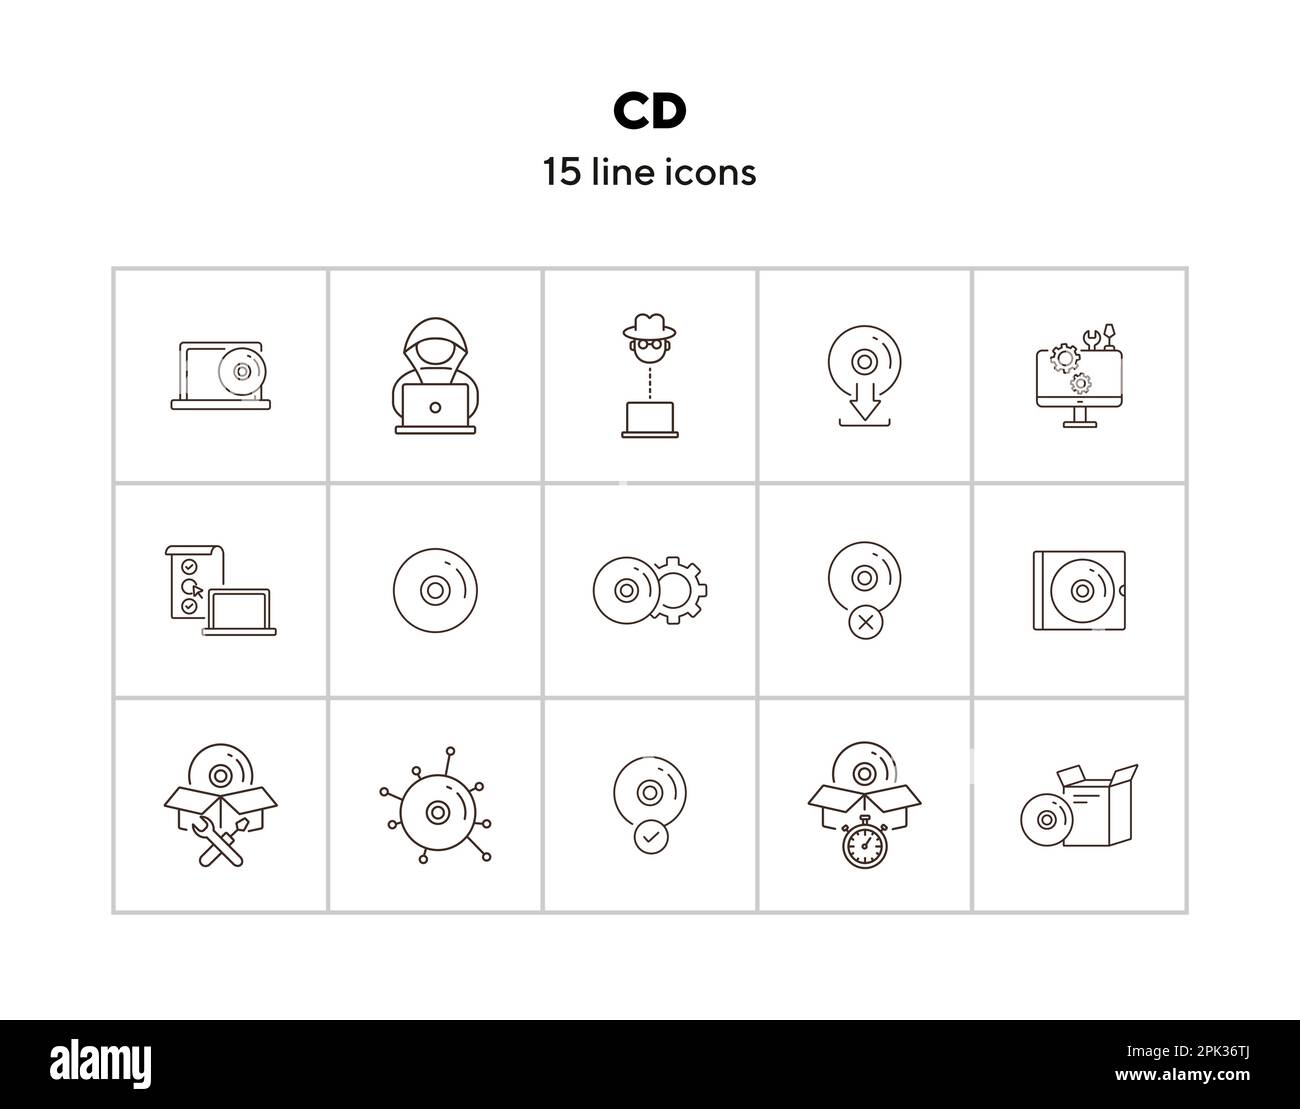 CD icons Stock Vector